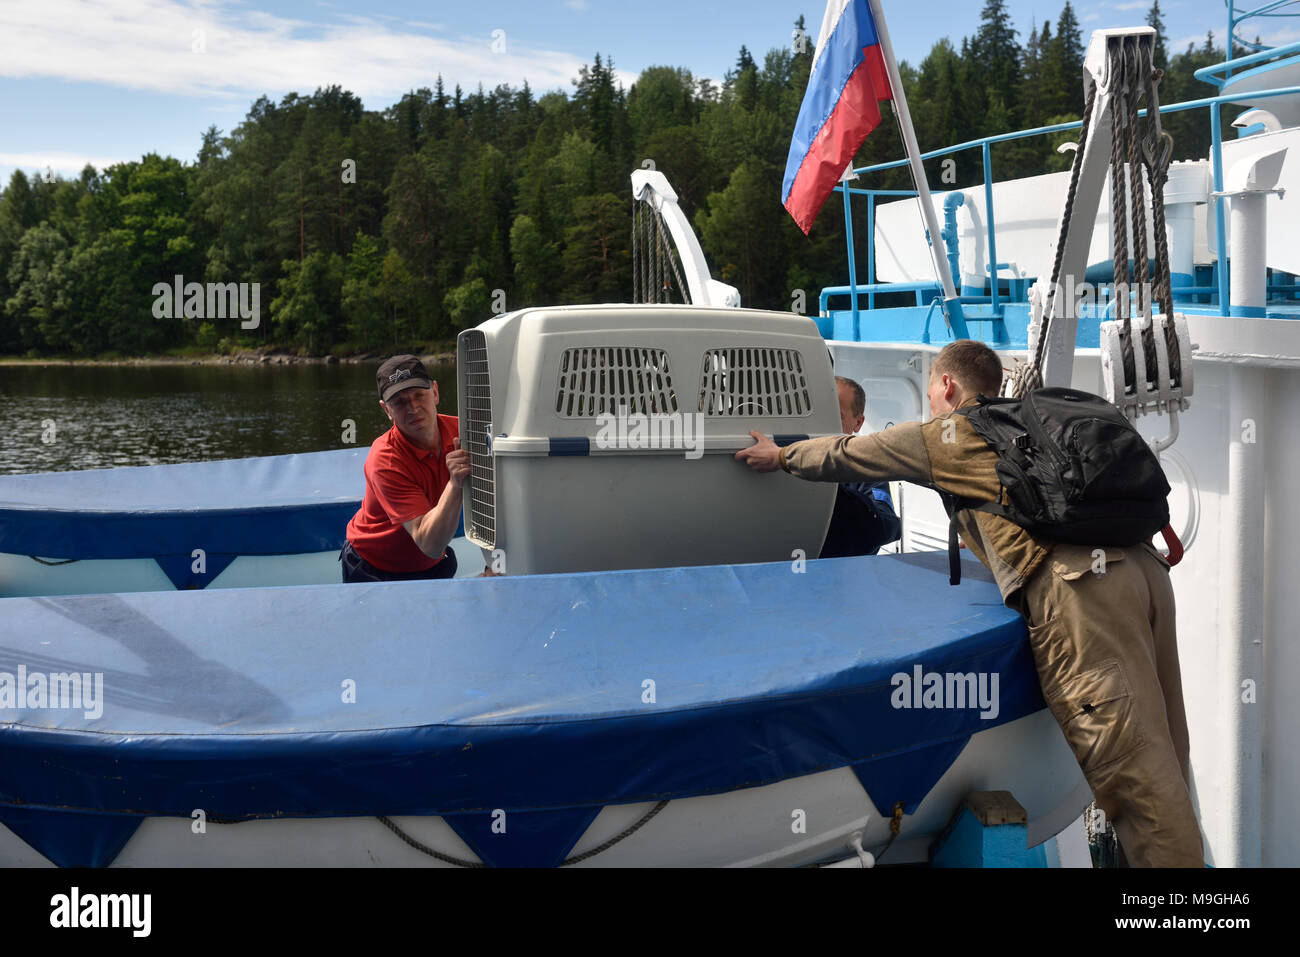 Valaam island, Russia - July 29, 2015: Vyacheslav Alekseev (right) and others carrying the cage with Ladoga ringed seal from the ship. Animals was cur Stock Photo